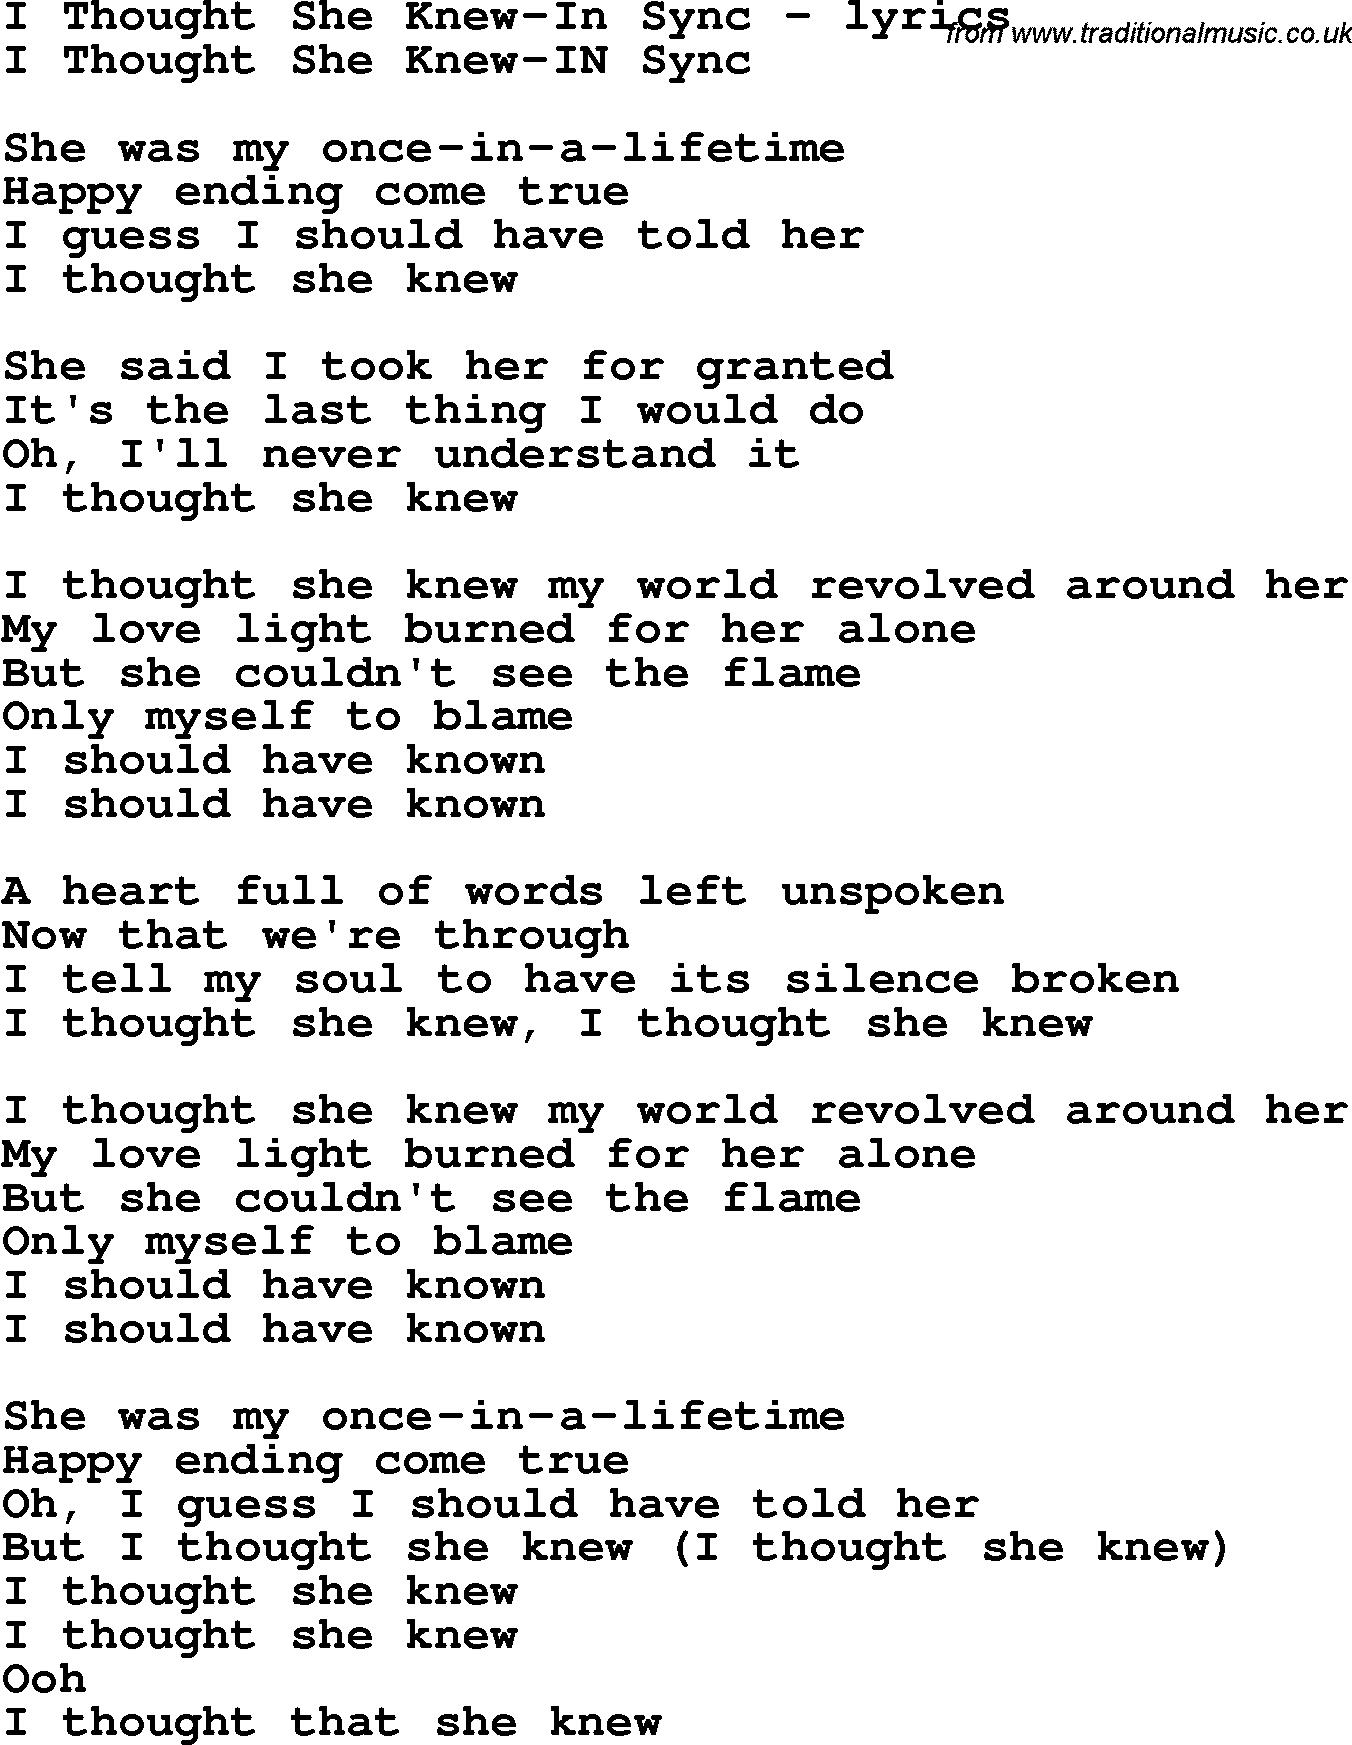 Love Song Lyrics for: I Thought She Knew-In Sync